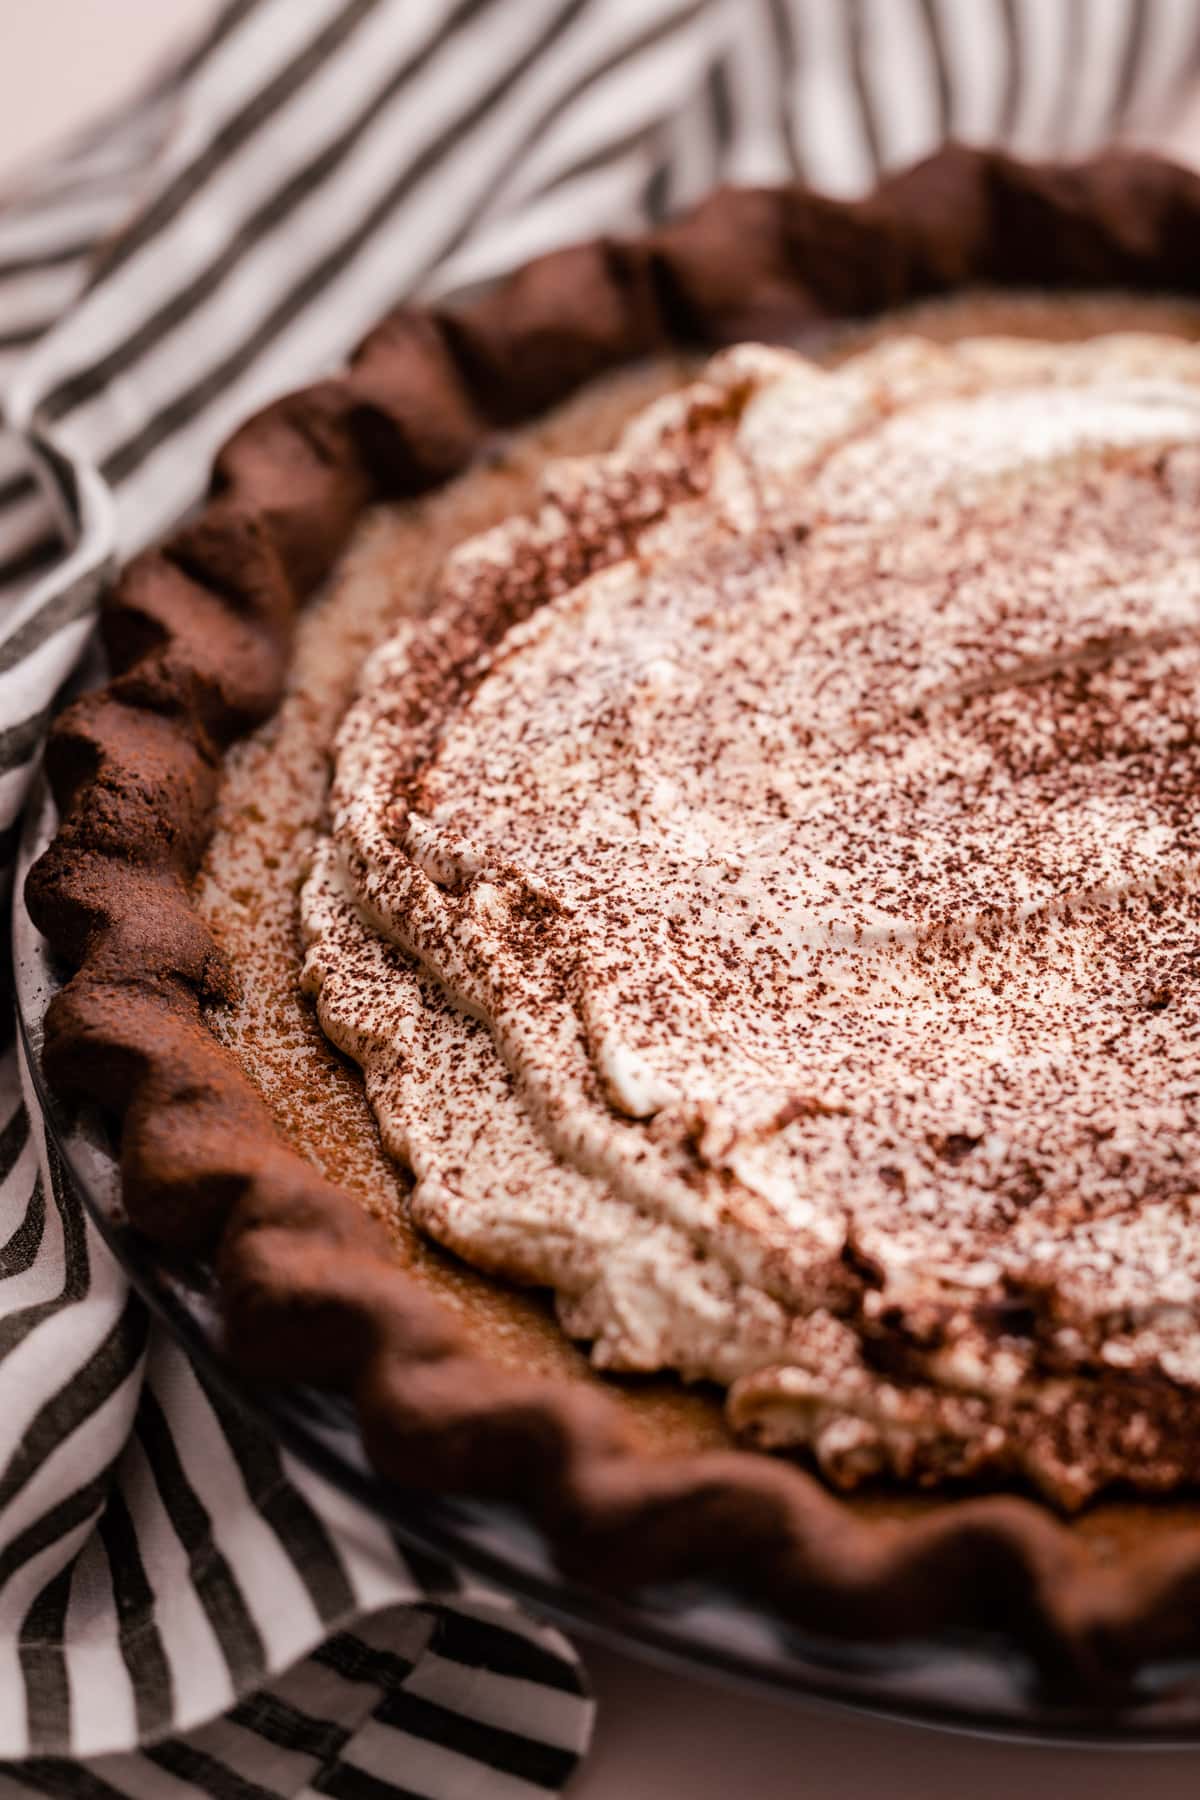 A coffee custard pie with whipped cream on top.